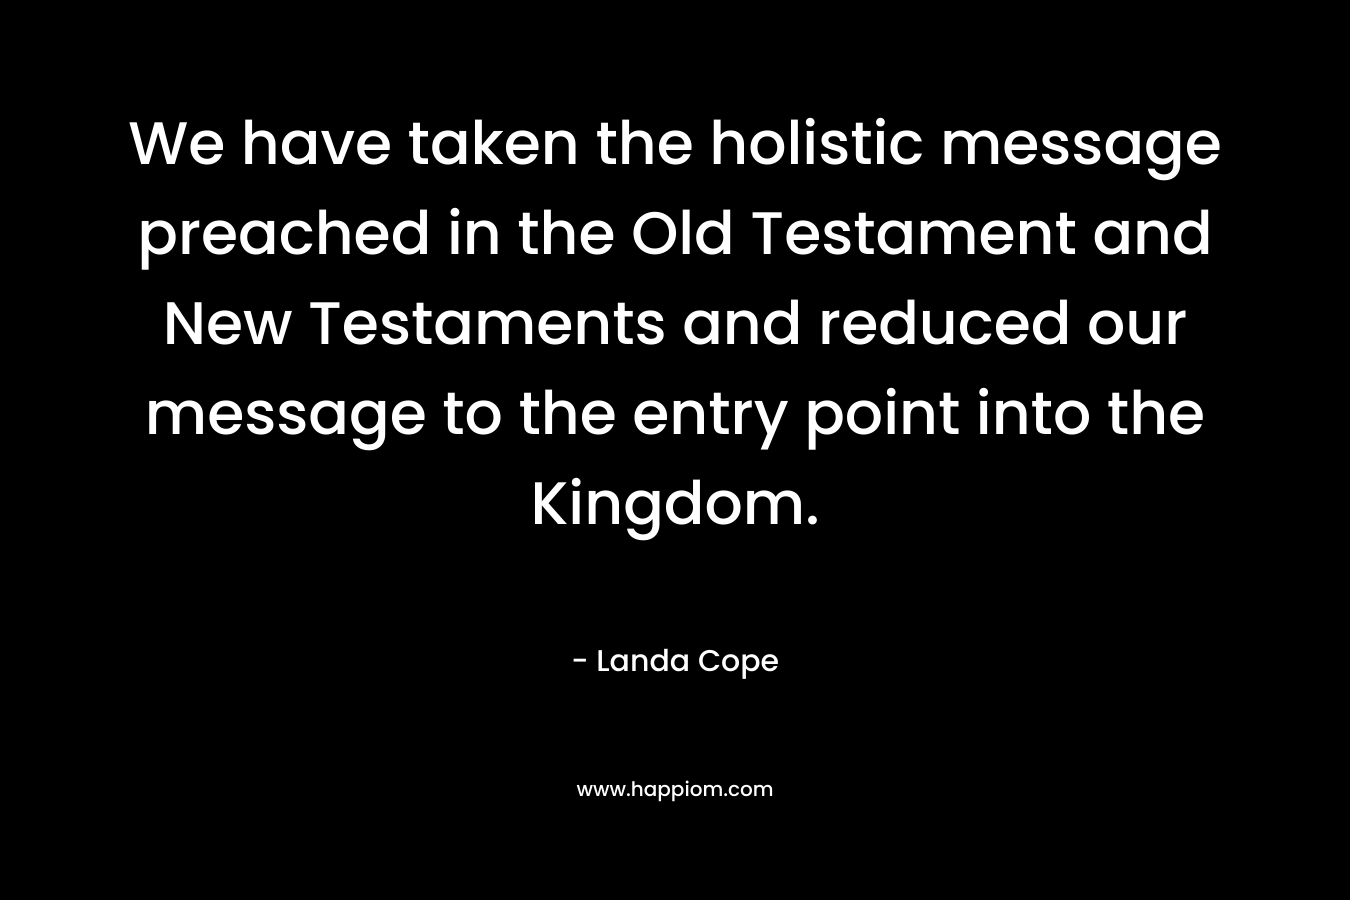 We have taken the holistic message preached in the Old Testament and New Testaments and reduced our message to the entry point into the Kingdom. – Landa Cope